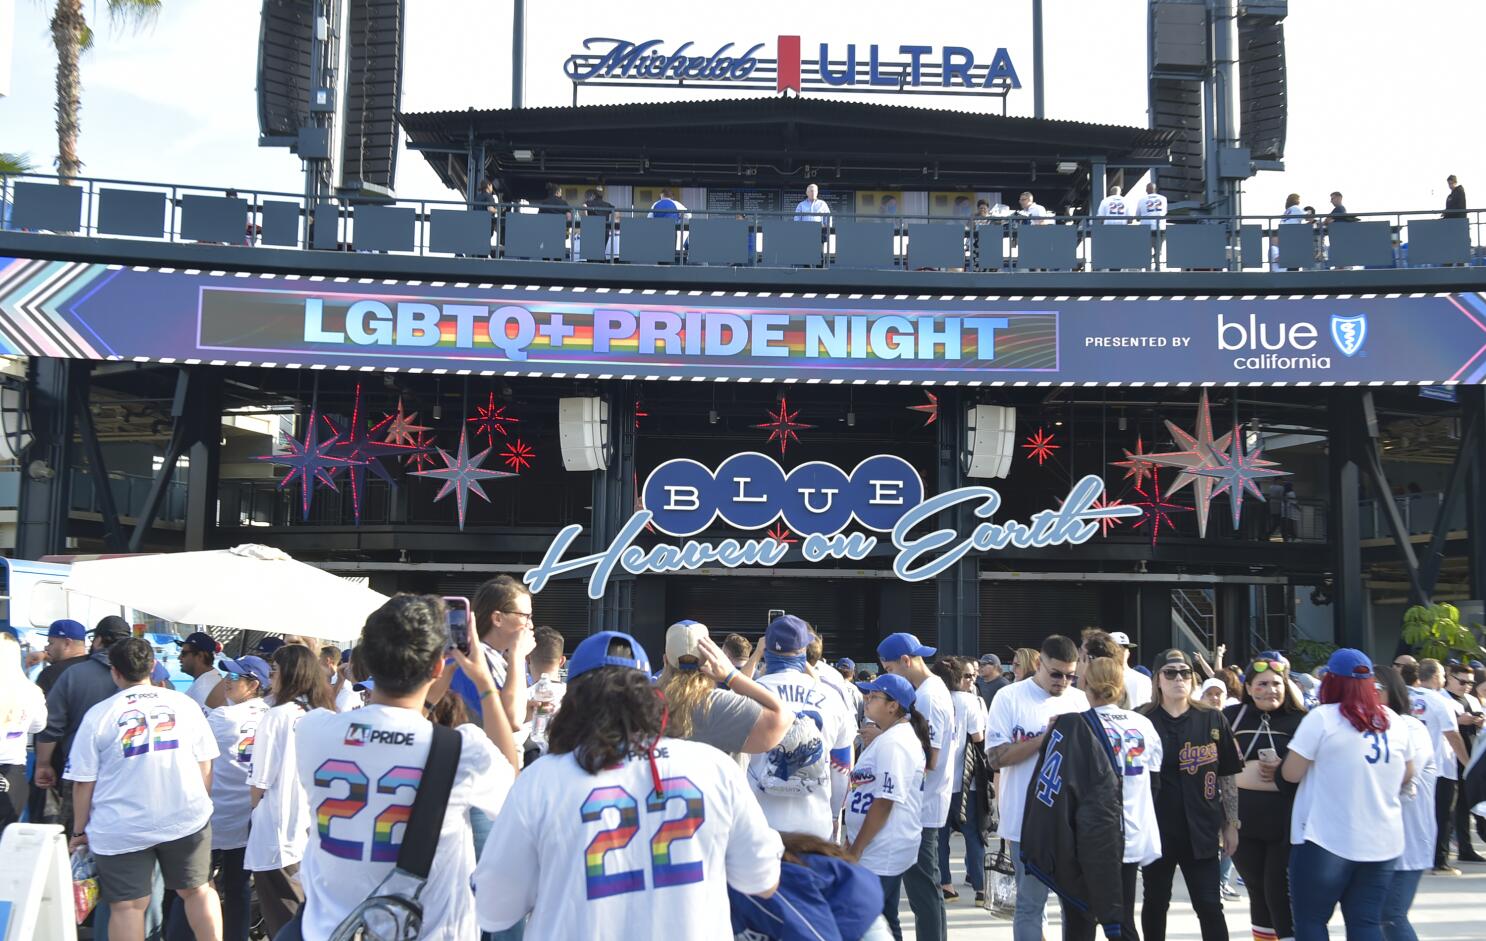 Dodgers no longer have backbone after Pride Night fiasco - Los Angeles Times